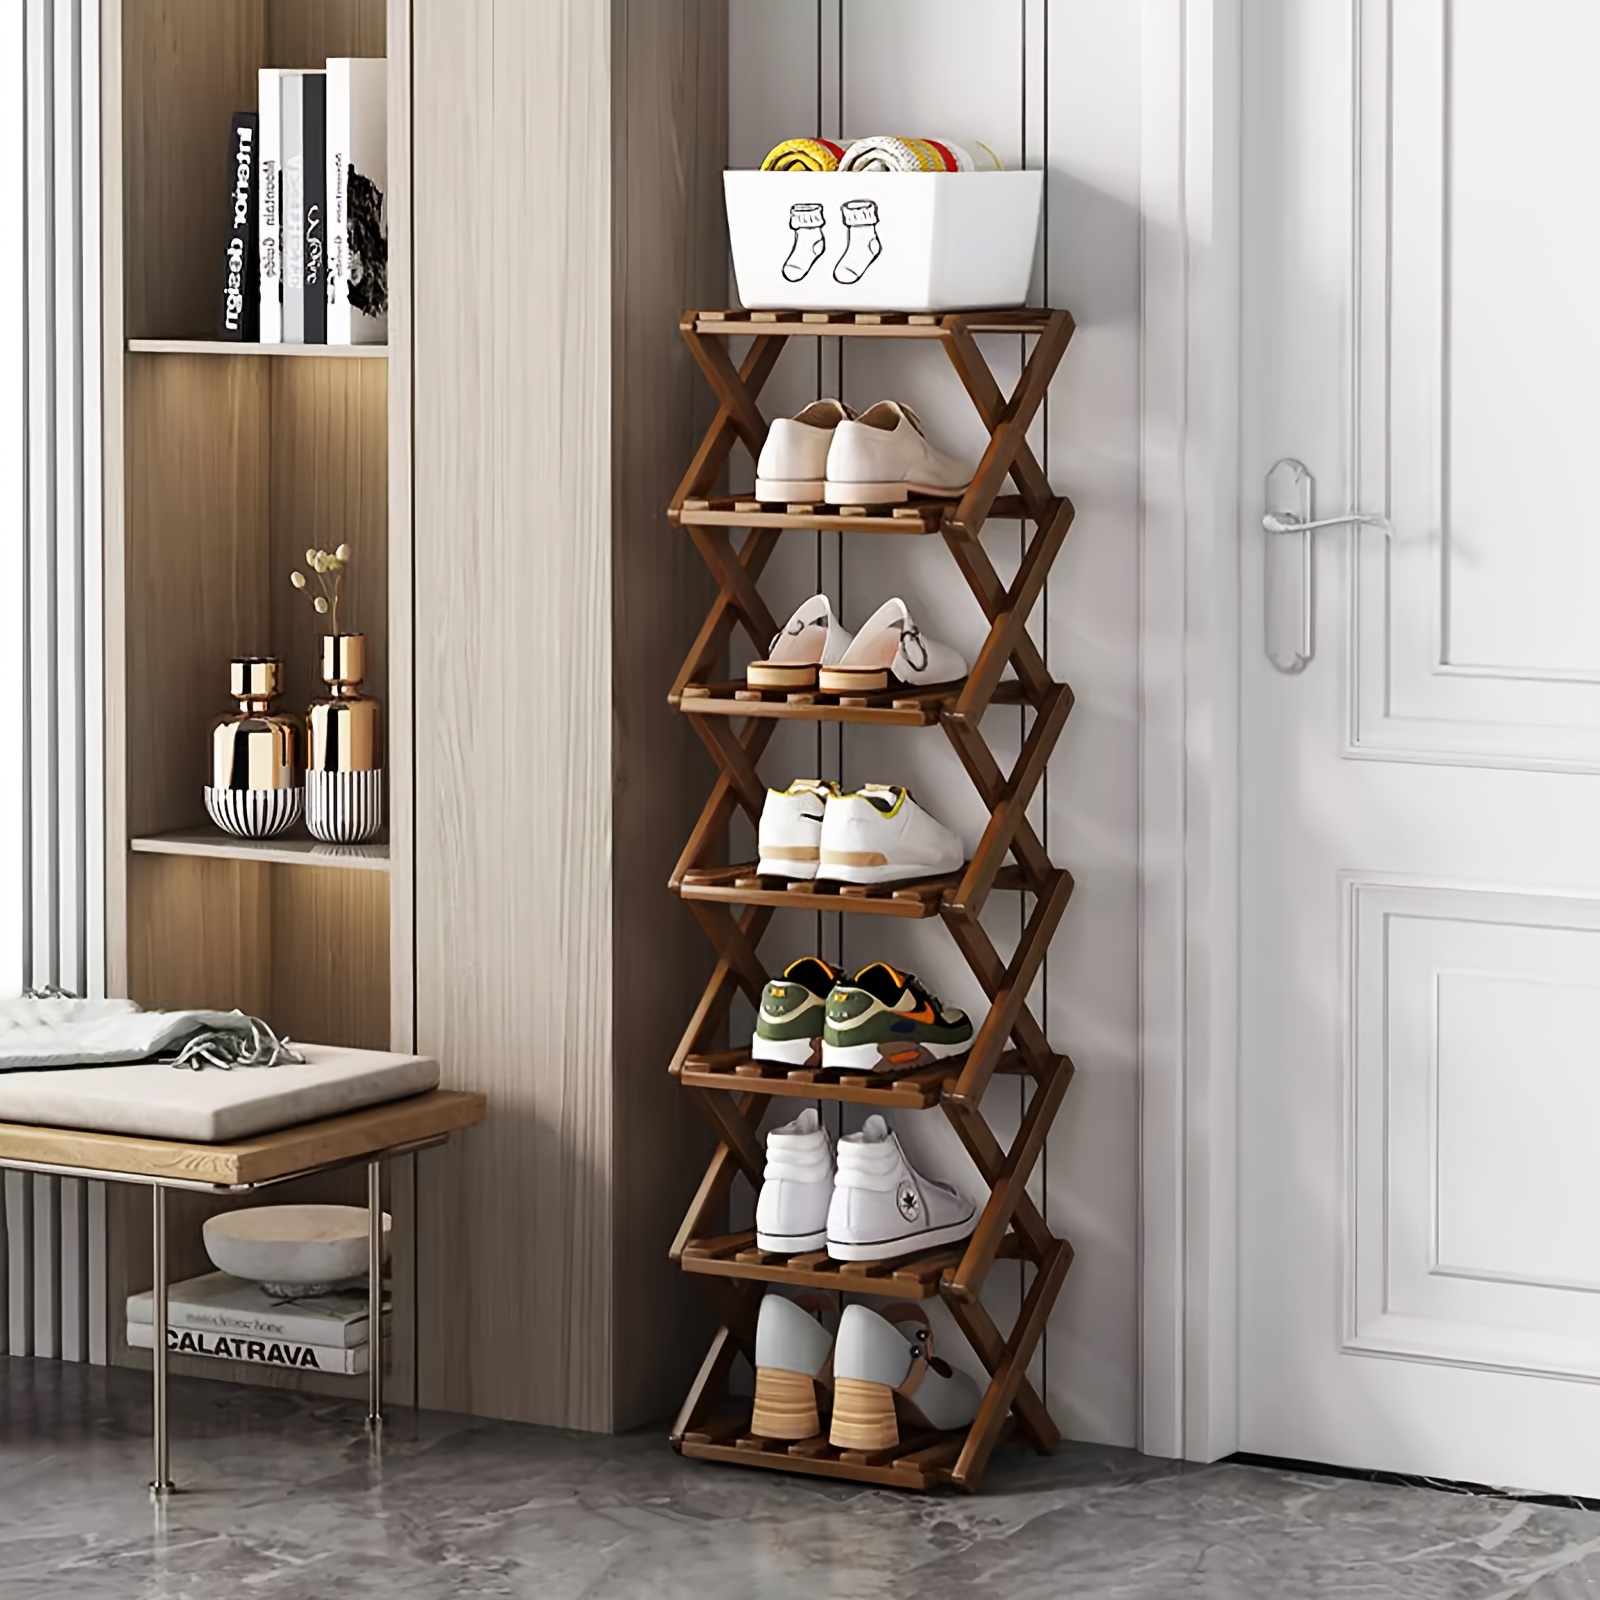 

Easy-fold Bamboo Shoe Rack - Multi-layer, No-install Storage Organizer For Dorms, Living Rooms & Entryways - Available In 4, 5, 6, Or 7 Tiers